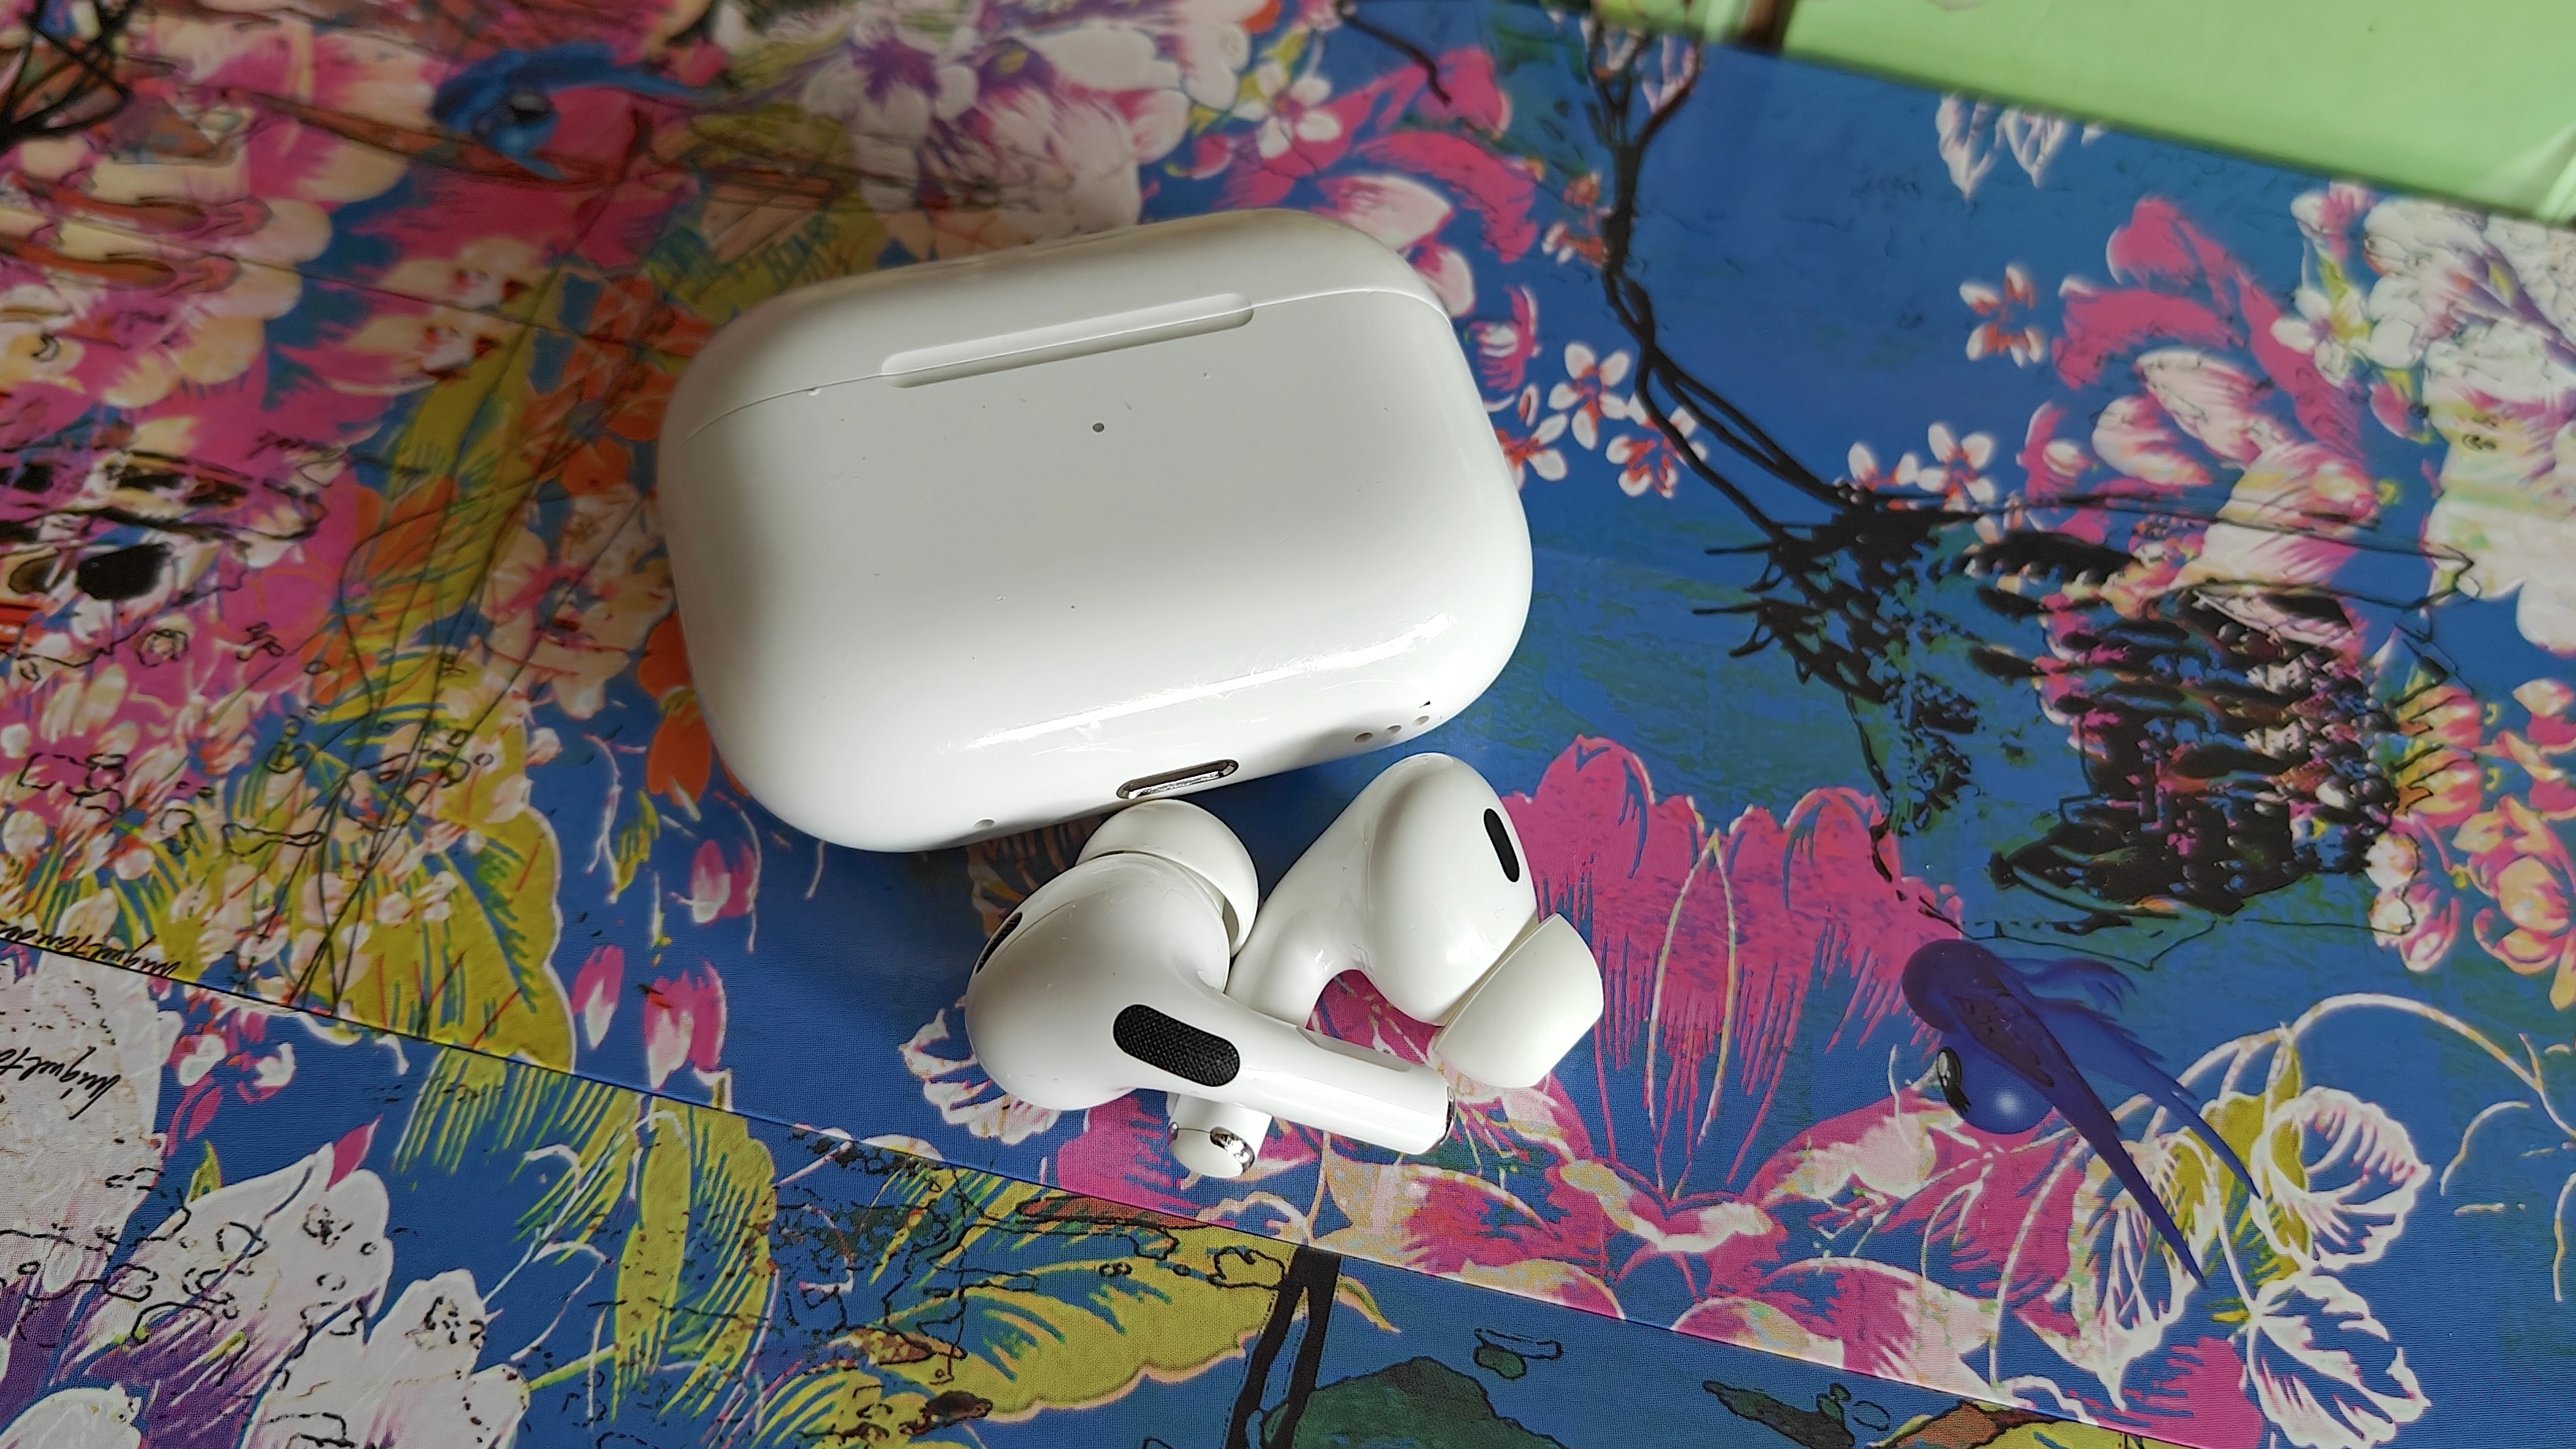 The AirPods Pro 2 displayed on a colorful background